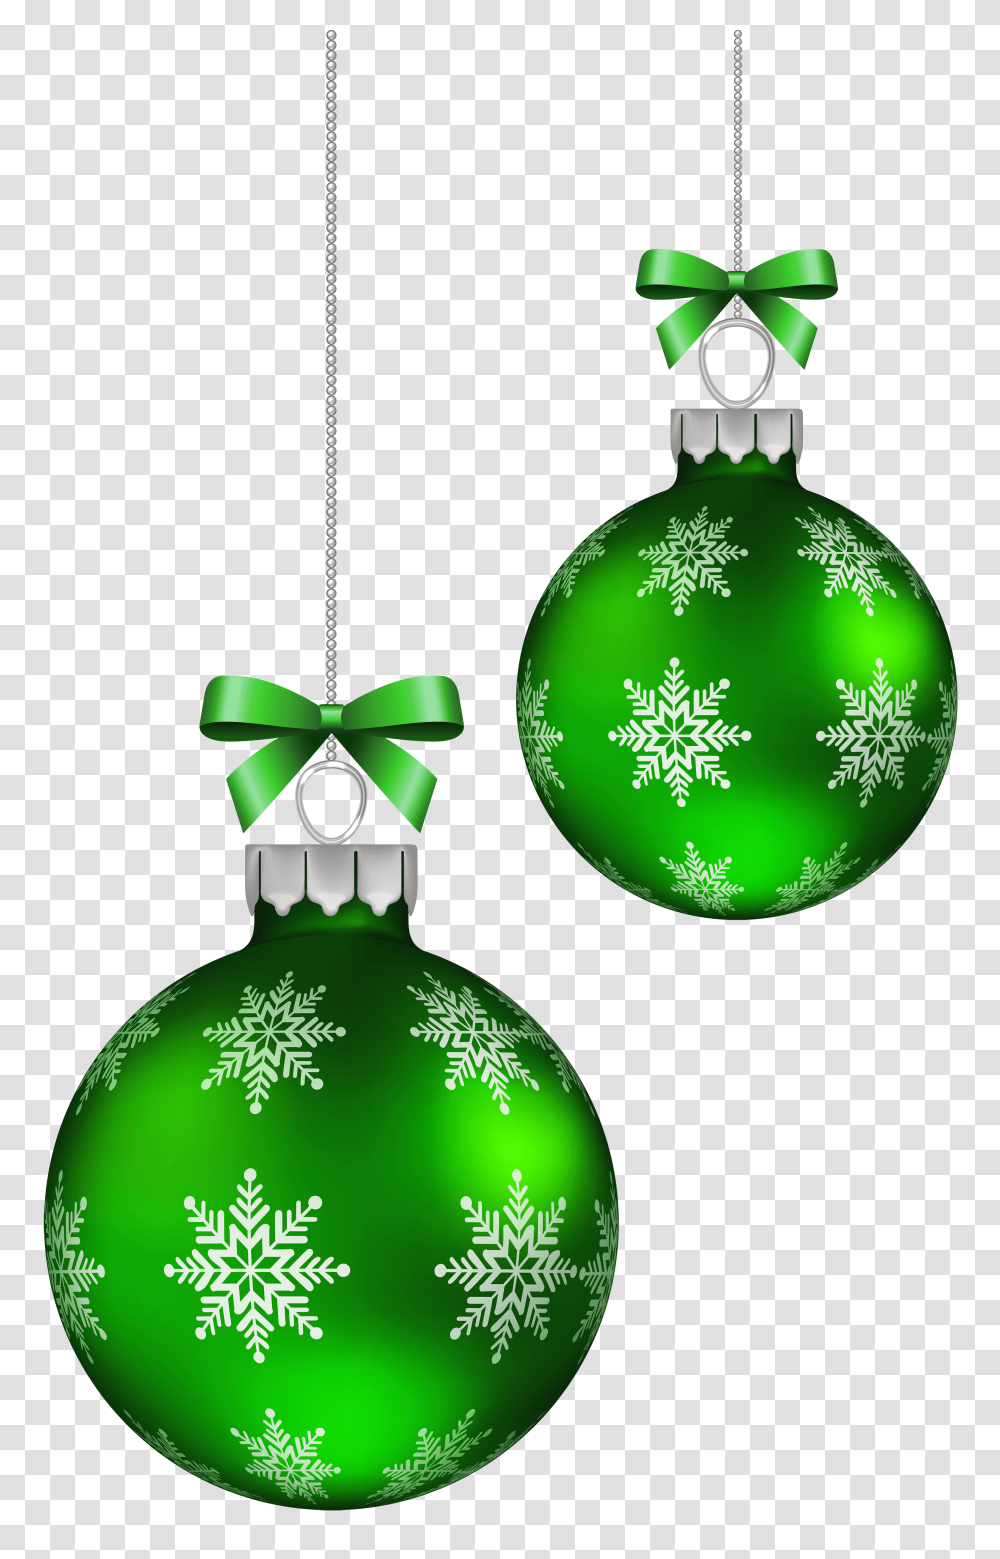 Decoration Clipart Image Background Christmas Balls, Green, Recycling Symbol, Elf, Graphics Transparent Png